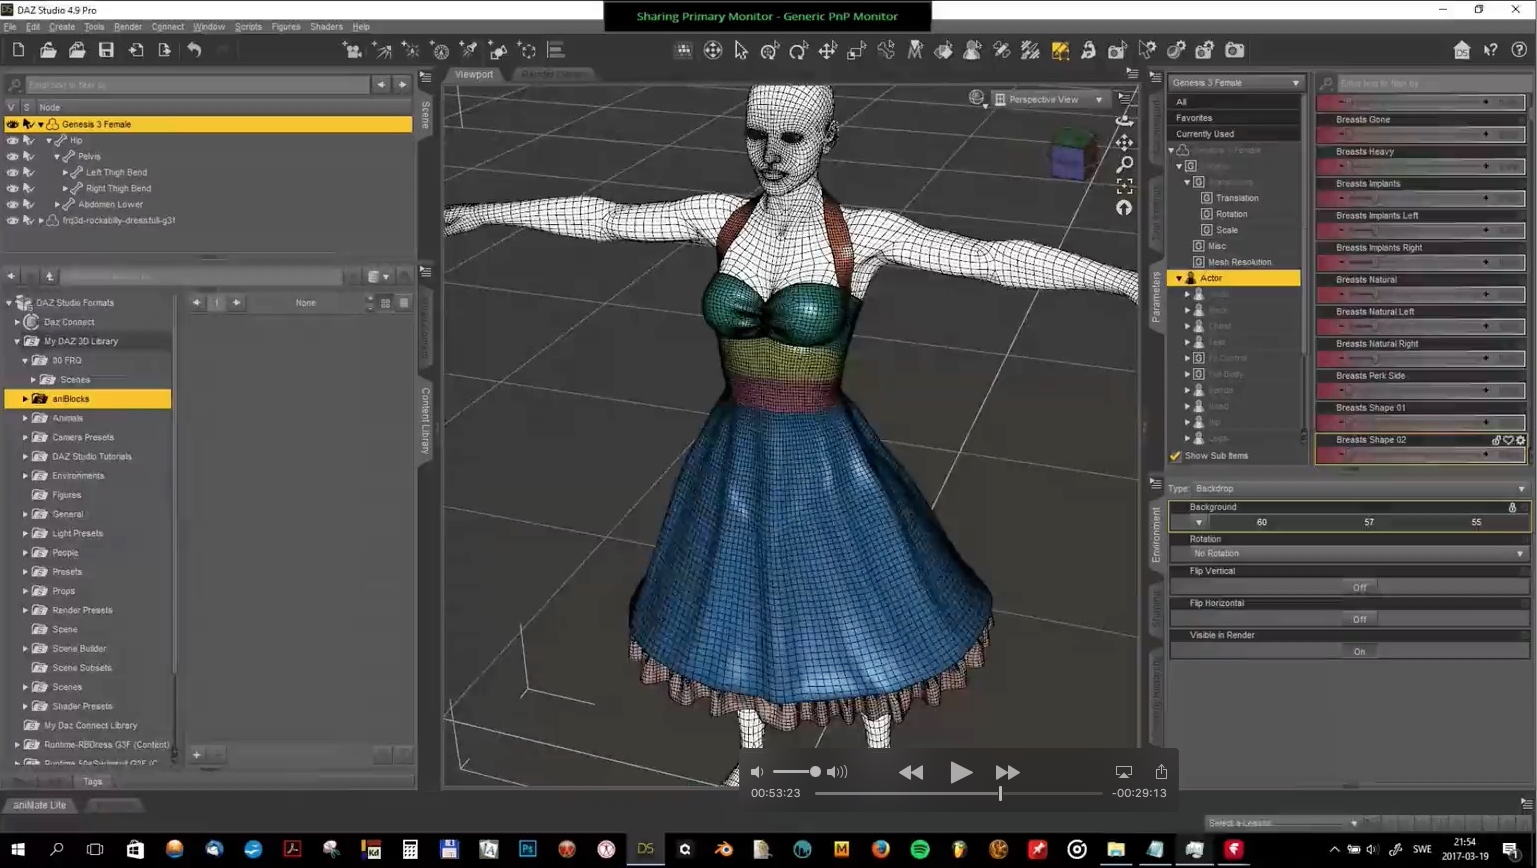 The Ultimate Guide to Creating Complex Outfits (Part 3) by: Digital Art LiveArki, 3D Models by Daz 3D